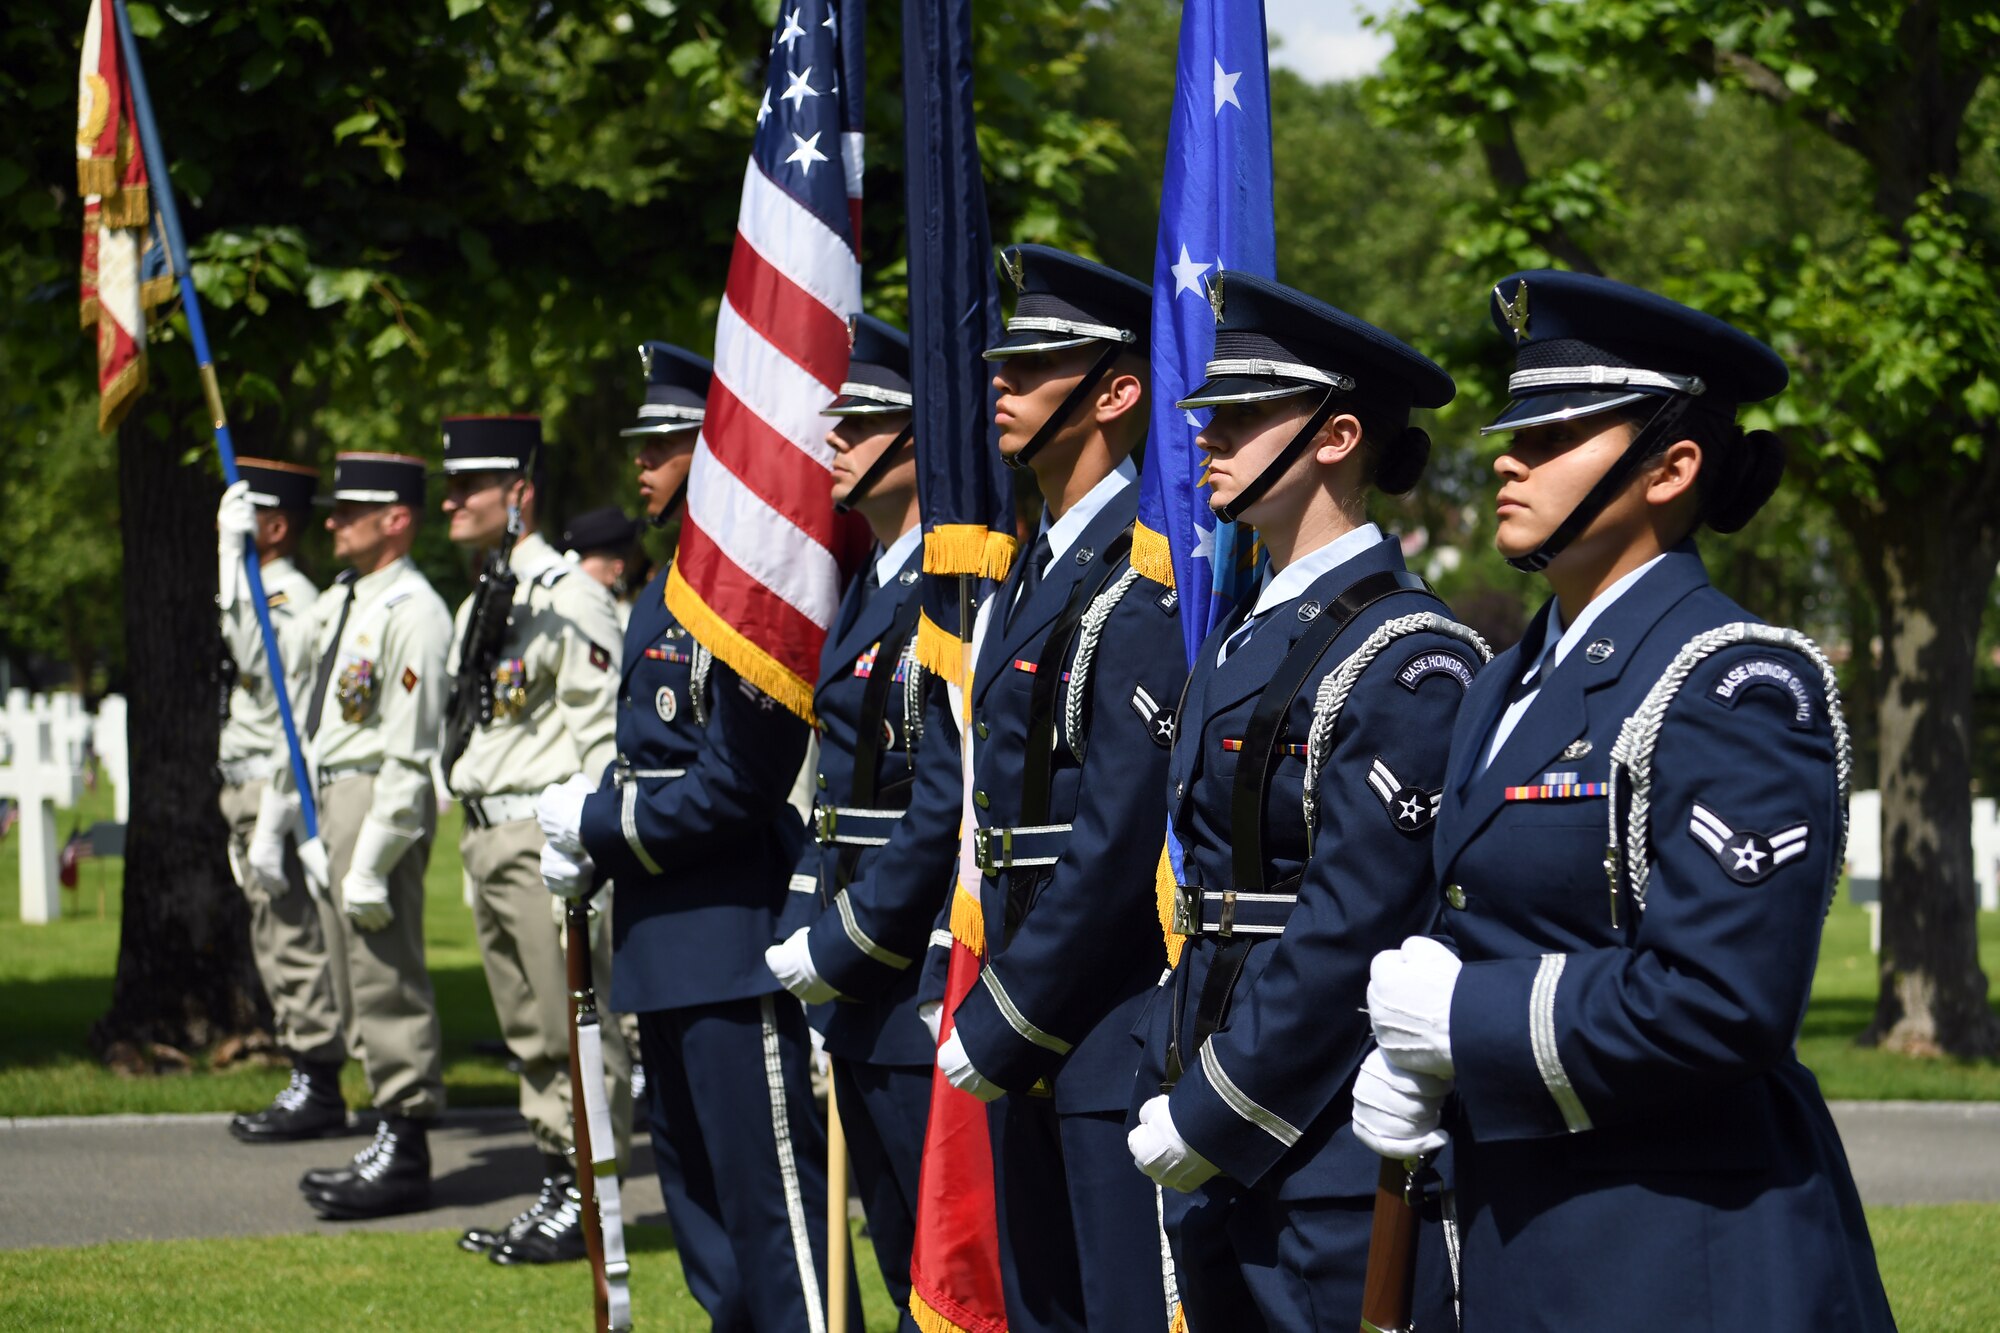 An honor guard detail from Spangdahlem Air Base, Germany, participates in a Memorial Day ceremony alongside their French counterparts at Suresnes American Cemetery and Memorial.